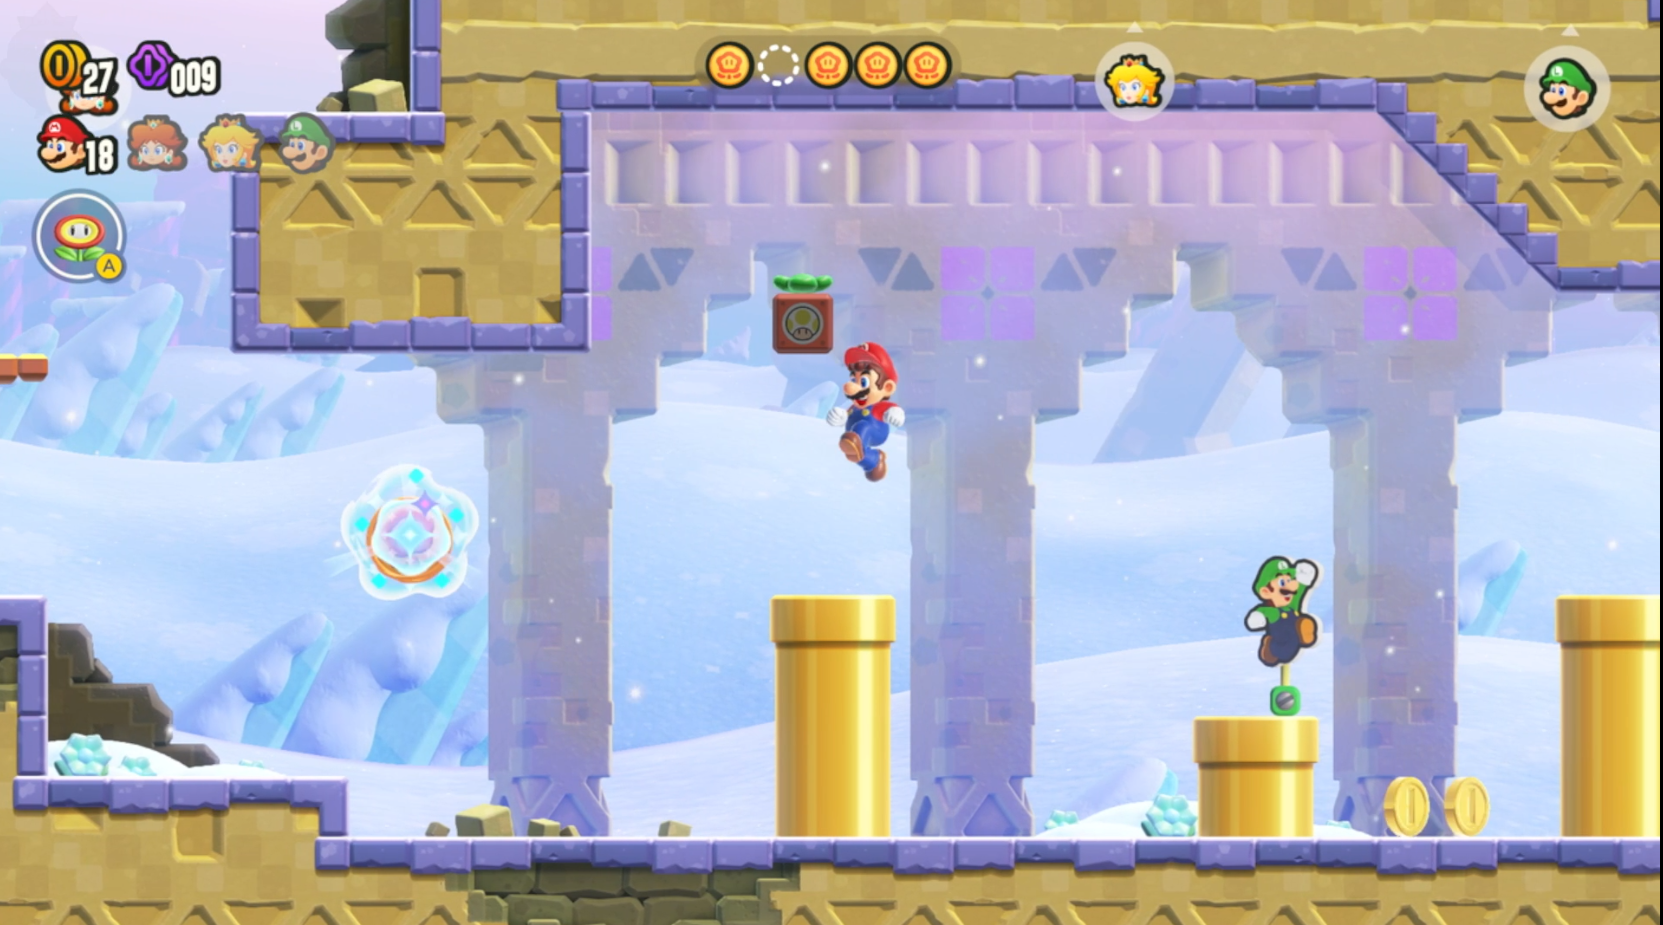 Mario jumps from a pipe up to a hidden block in Super Mario Wonder.